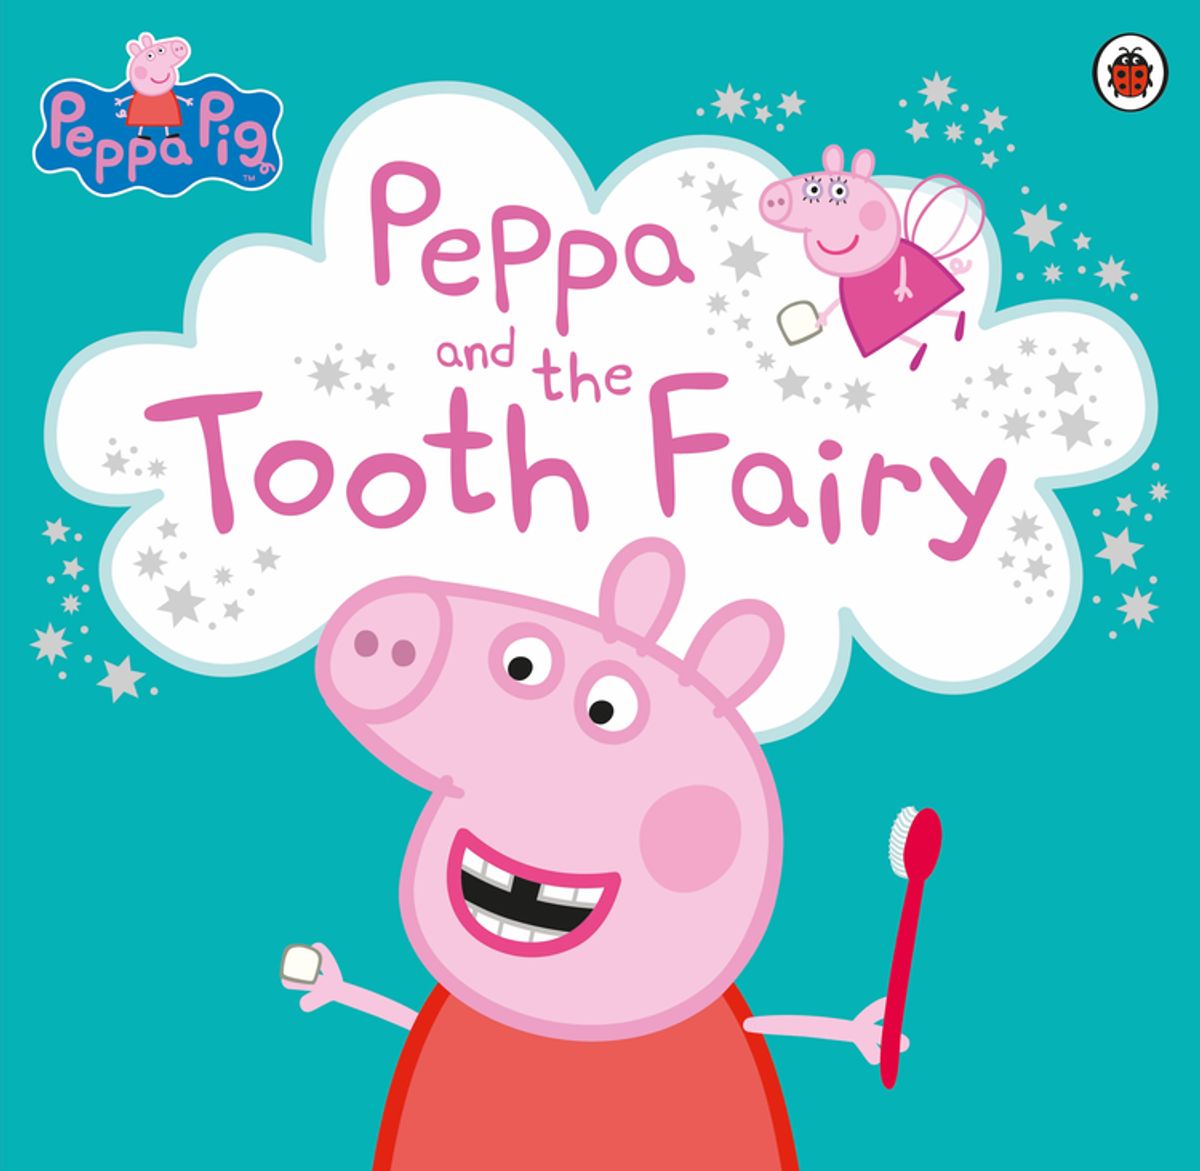 Peppa Pig coloring pages: We have created attractive coloring pages to support children’s development!